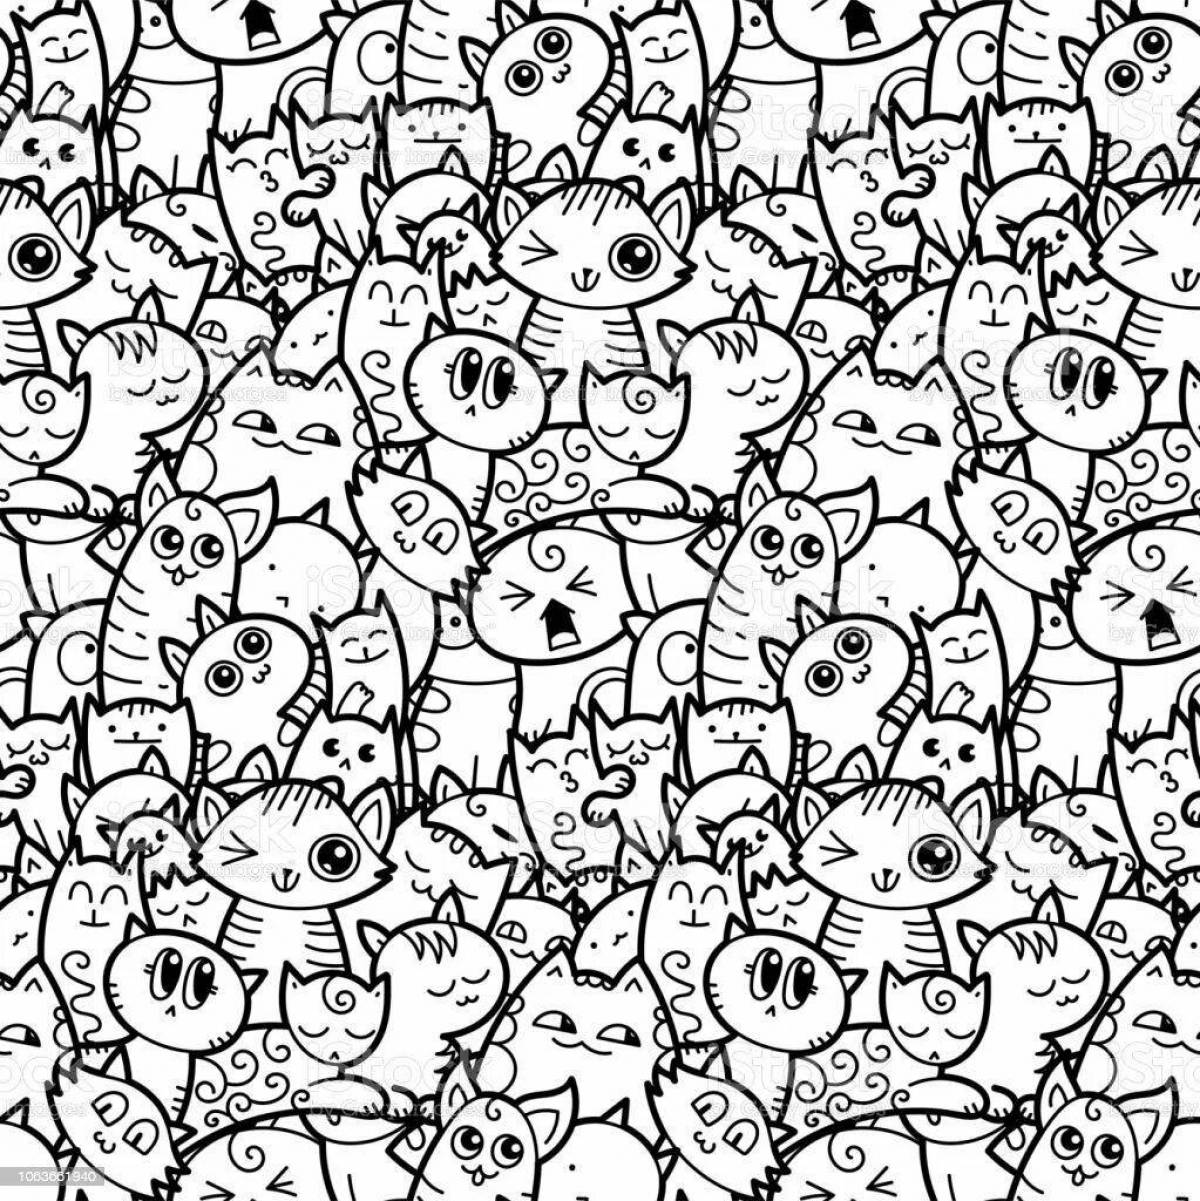 Cozy playful kittens coloring page